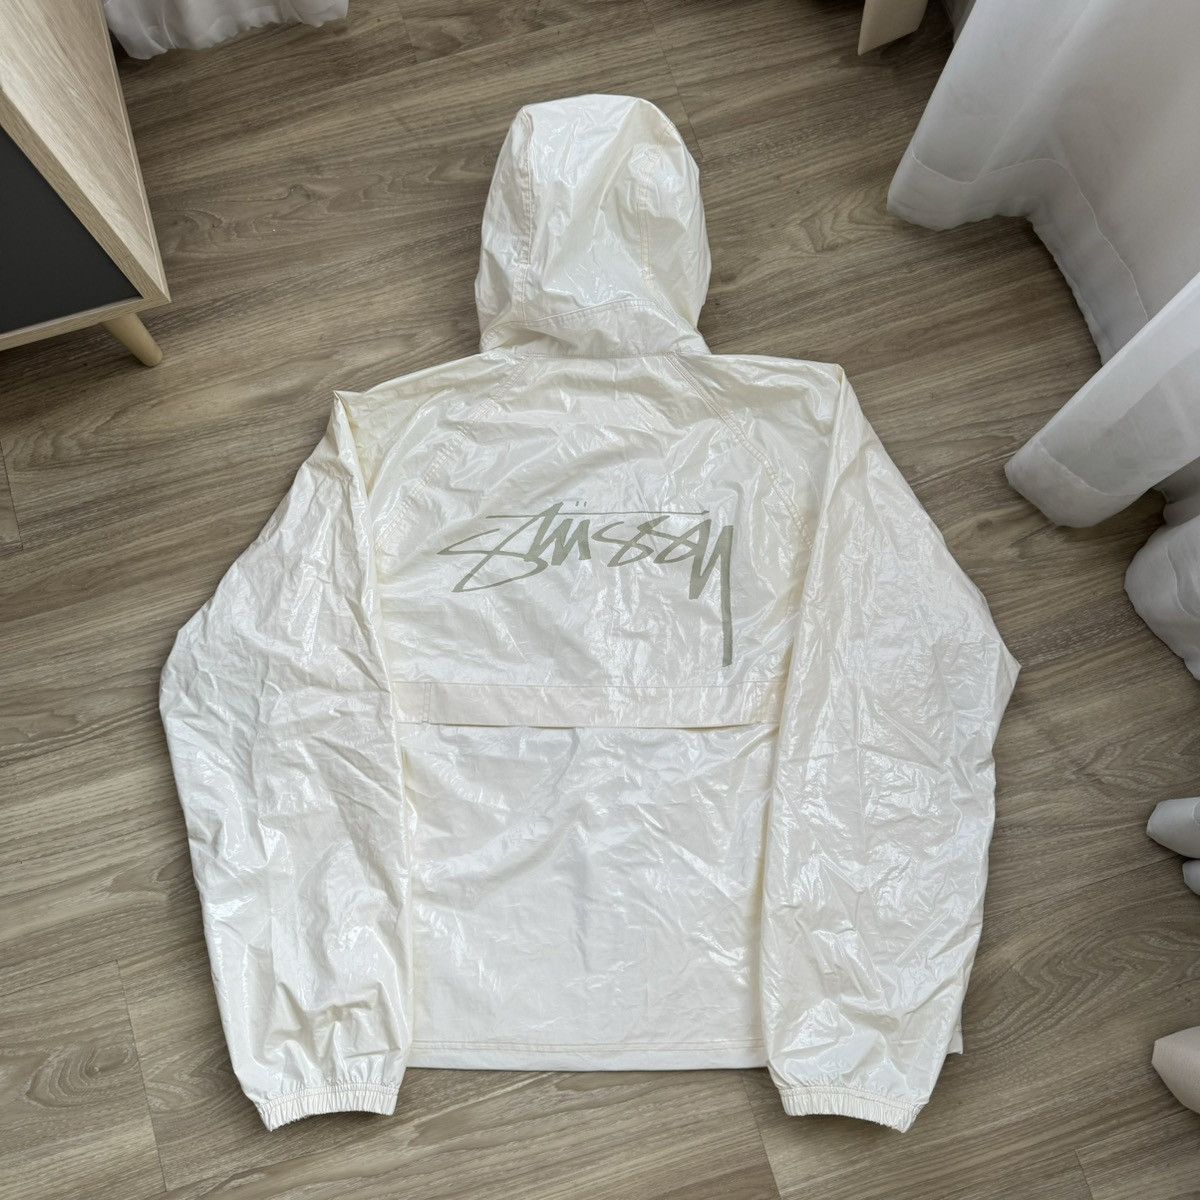 Stussy Stussy Beach Shell Coated Ripstop Jacket | Grailed